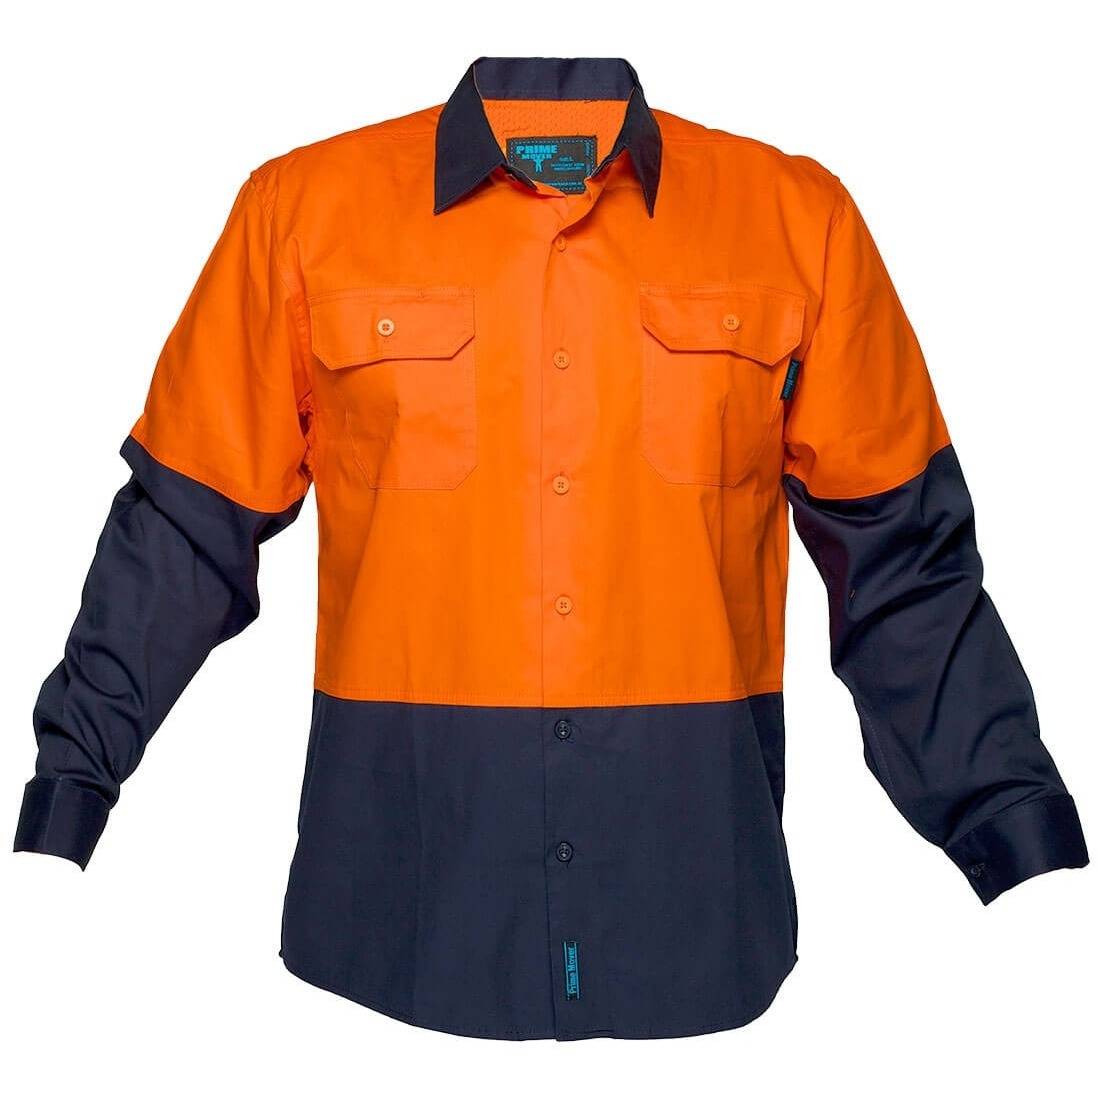 Prime Mover Canberra 155g Shirt L/S Class D - MS801